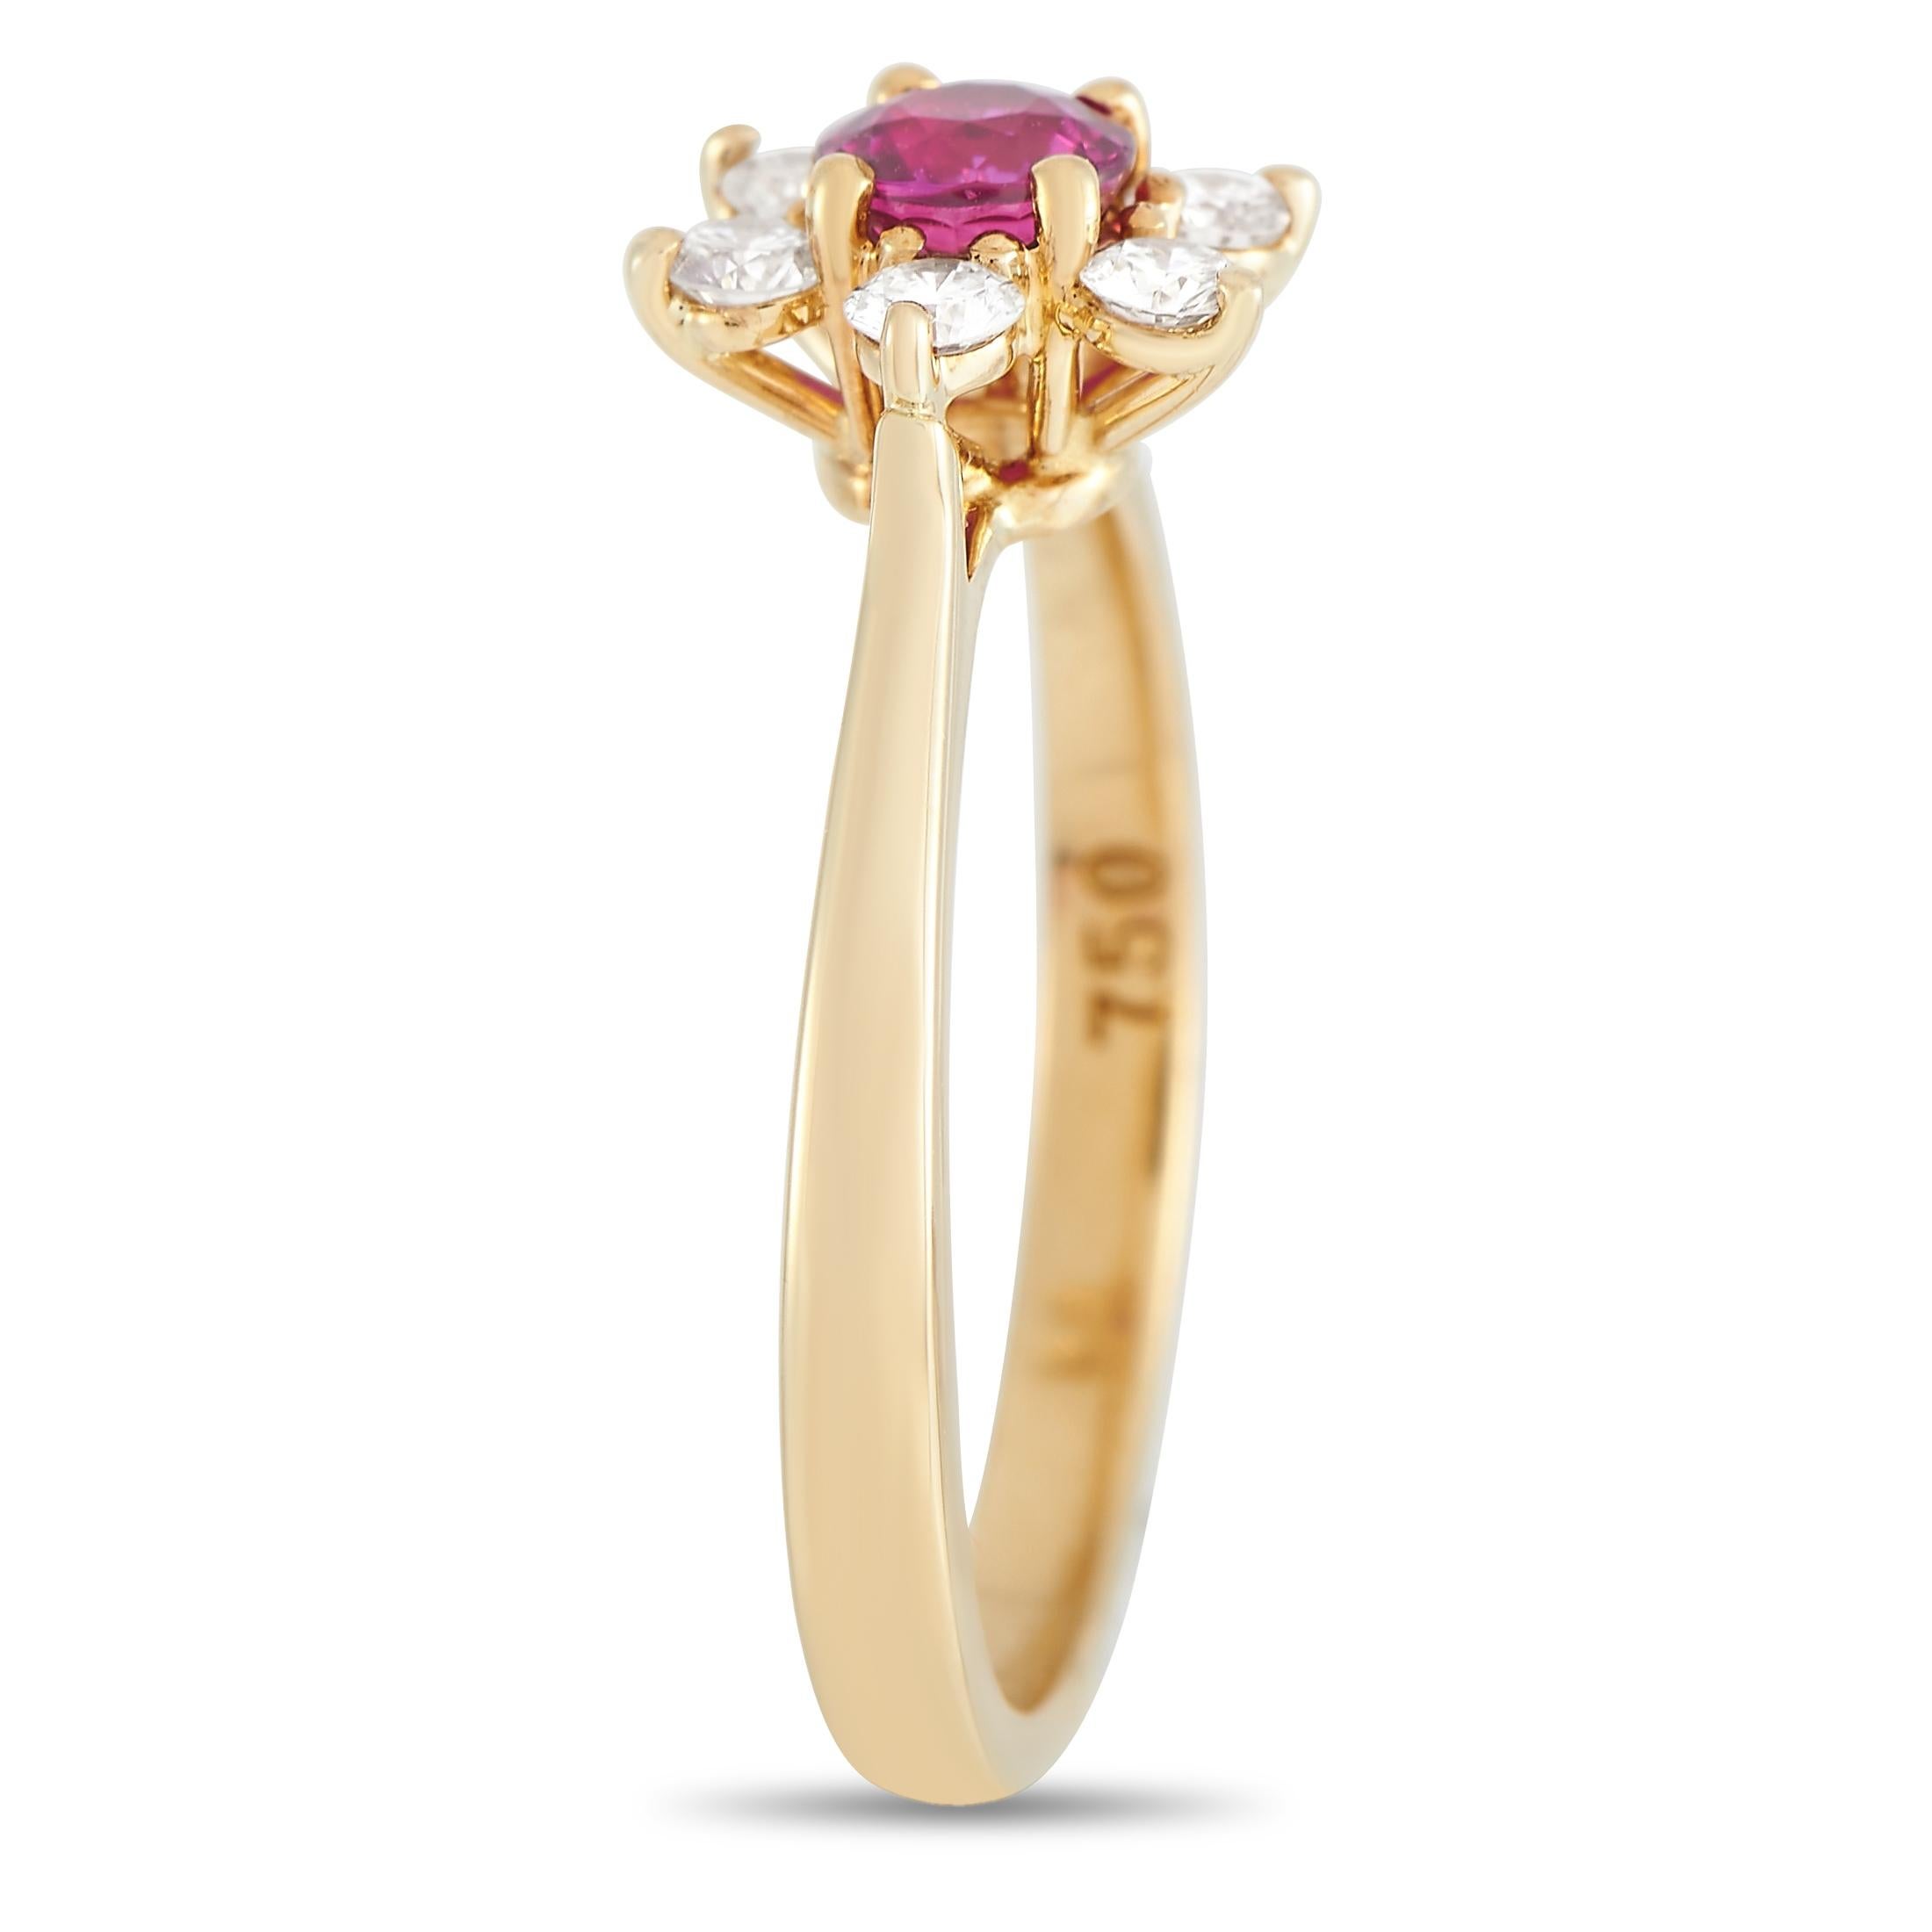 This radiant ring from Tiffany & Co. will continually capture your imagination. Perched atop an 18k Yellow Gold band measuring 2mm wide, you’ll find a 0.45 carat round-cut ruby surrounded by diamonds totaling 0.25 carats. A top height measuring 5mm